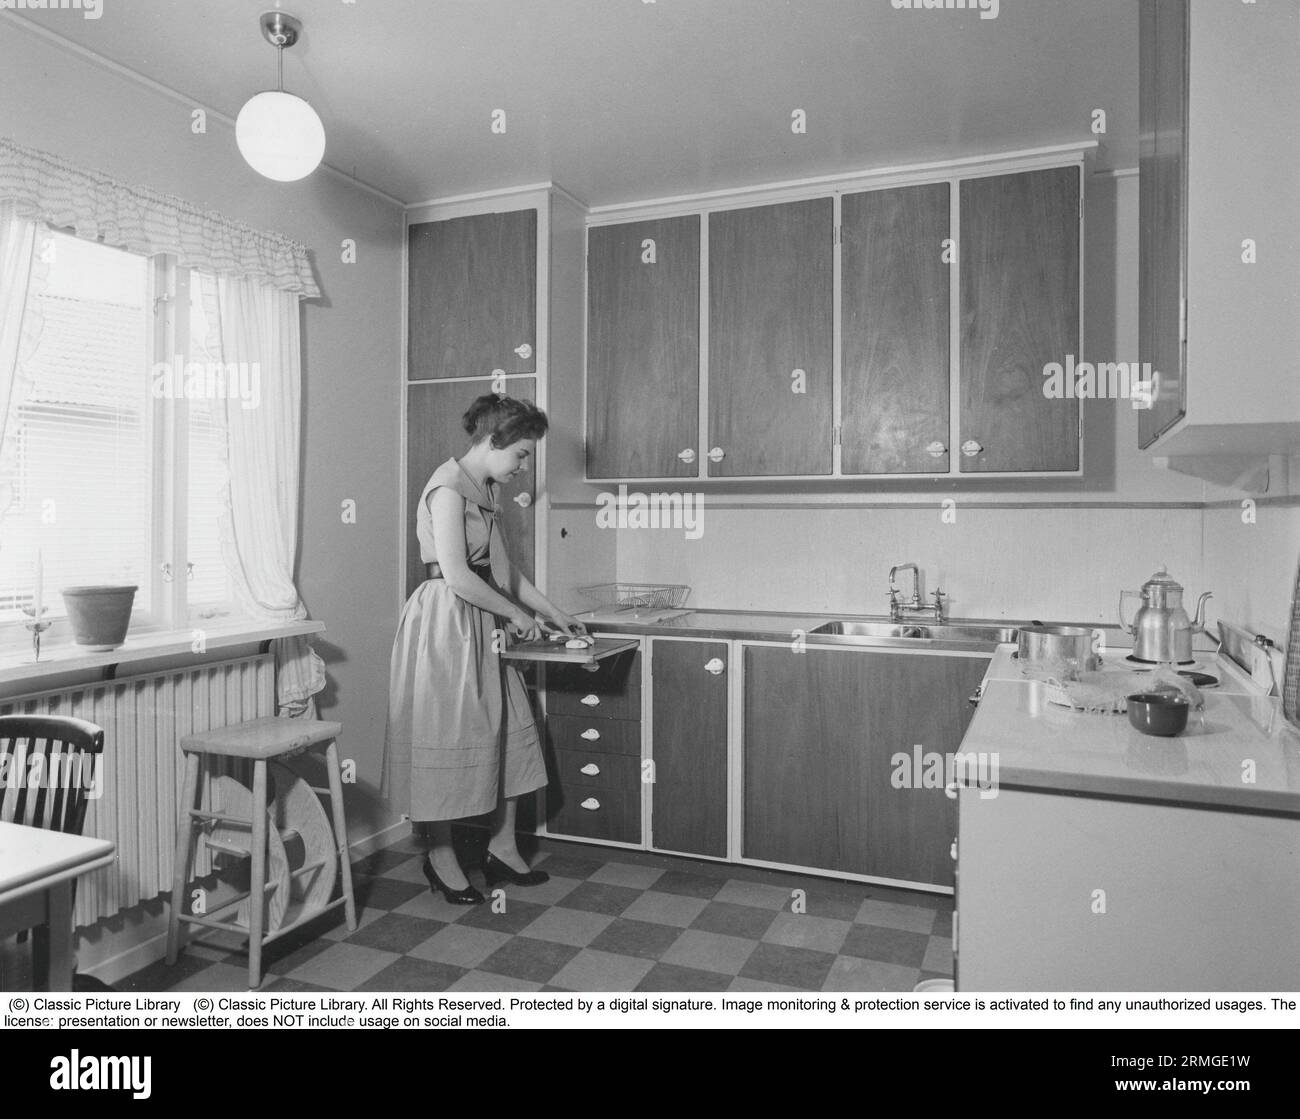 In the 1950s. A woman in a typical 1950s kitchen with wooden cabinets and typical of the decade. She uses the extendable cutting board to slice the sweet bread to eat.  Sweden 1958. Stock Photo